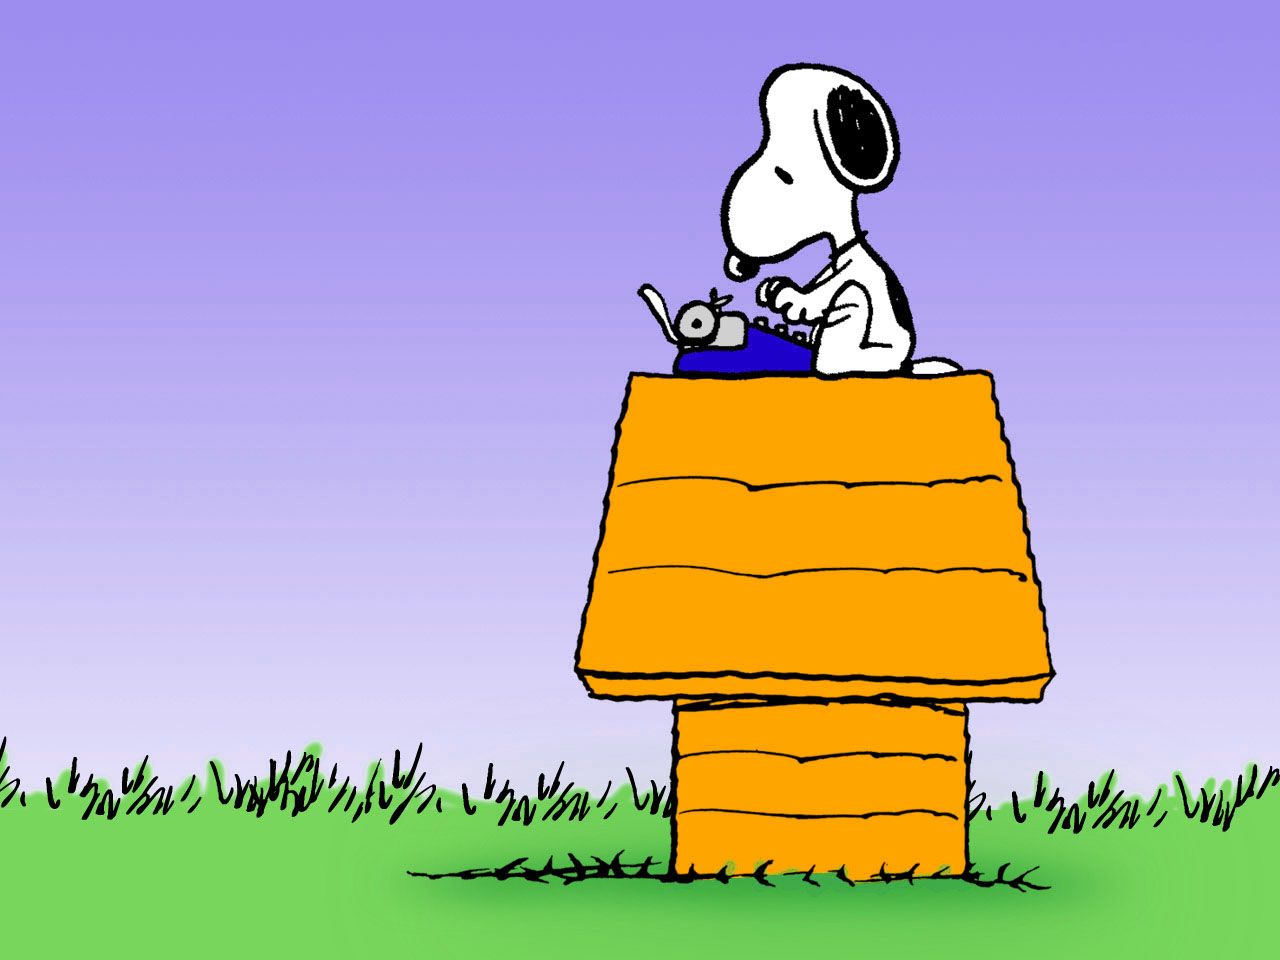 Snoopy Cartoon Pictures - Wallpaper HD Base